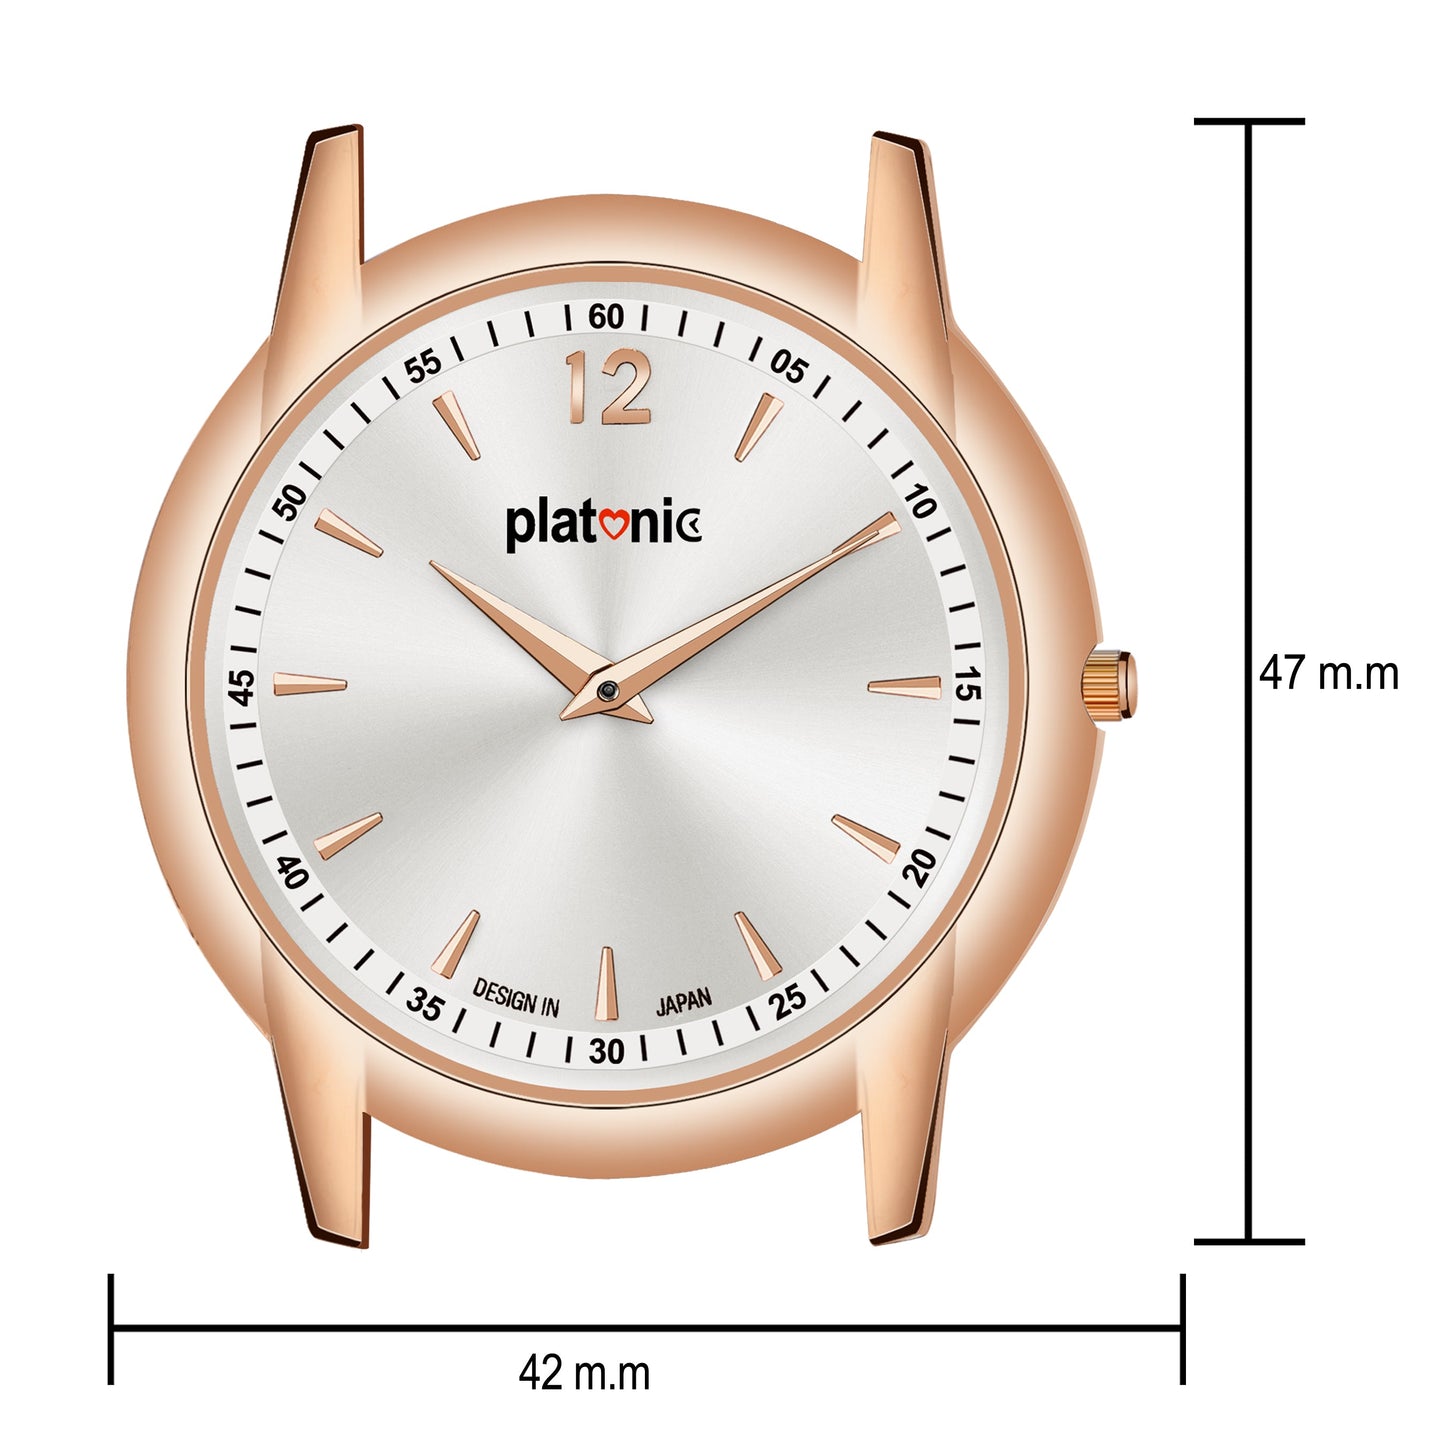 Platonic India's First Slimmest Timepiece White